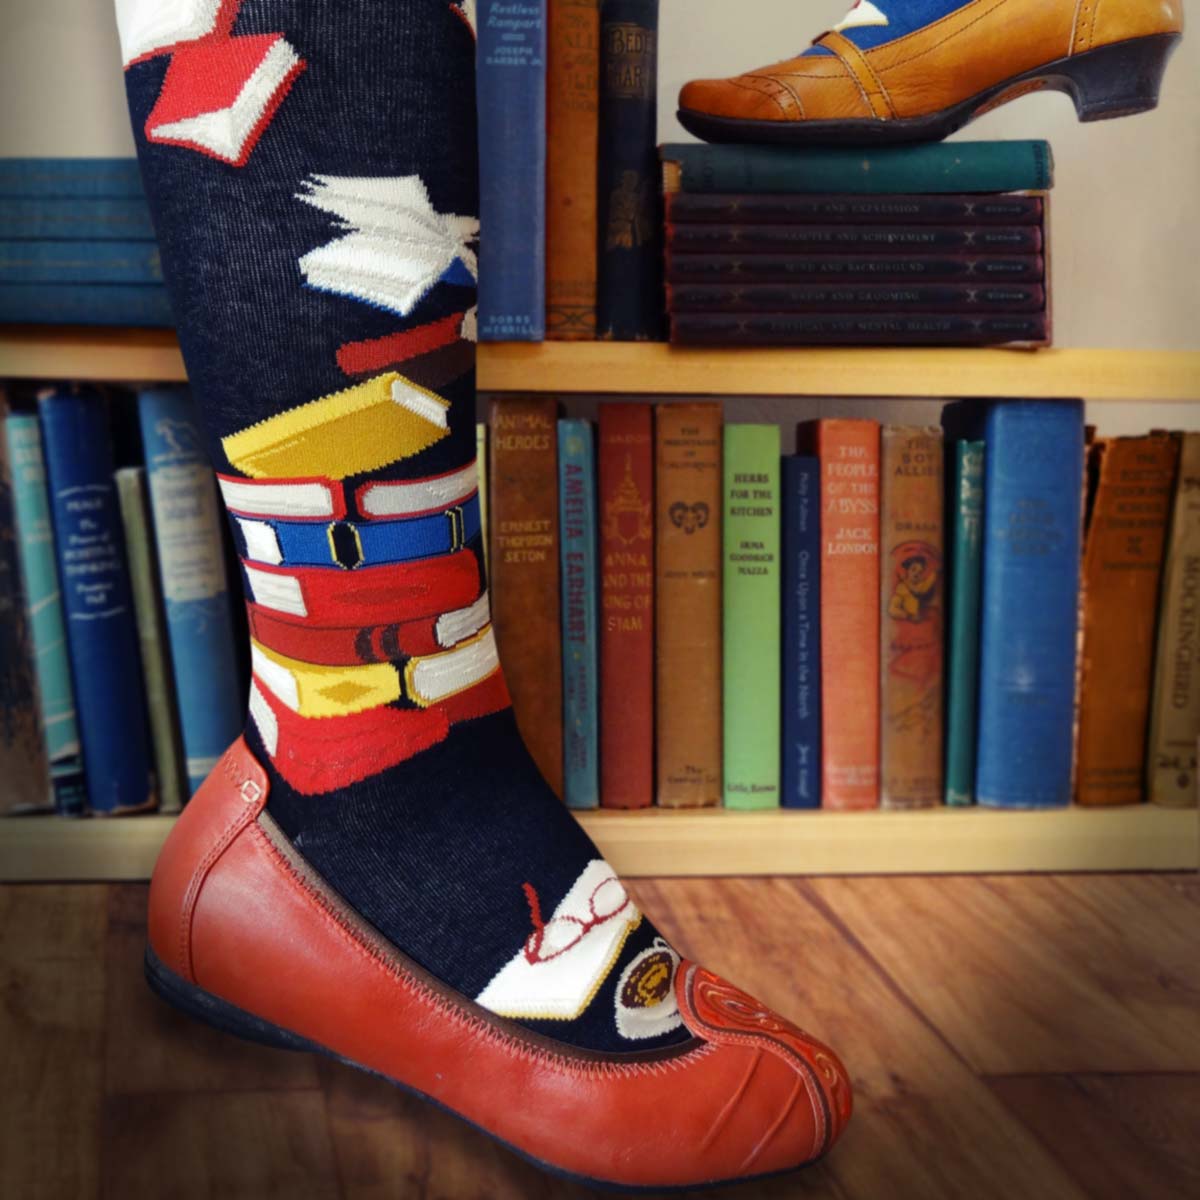 Book socks for women are black knee socks with red, yellow and blue books on them.